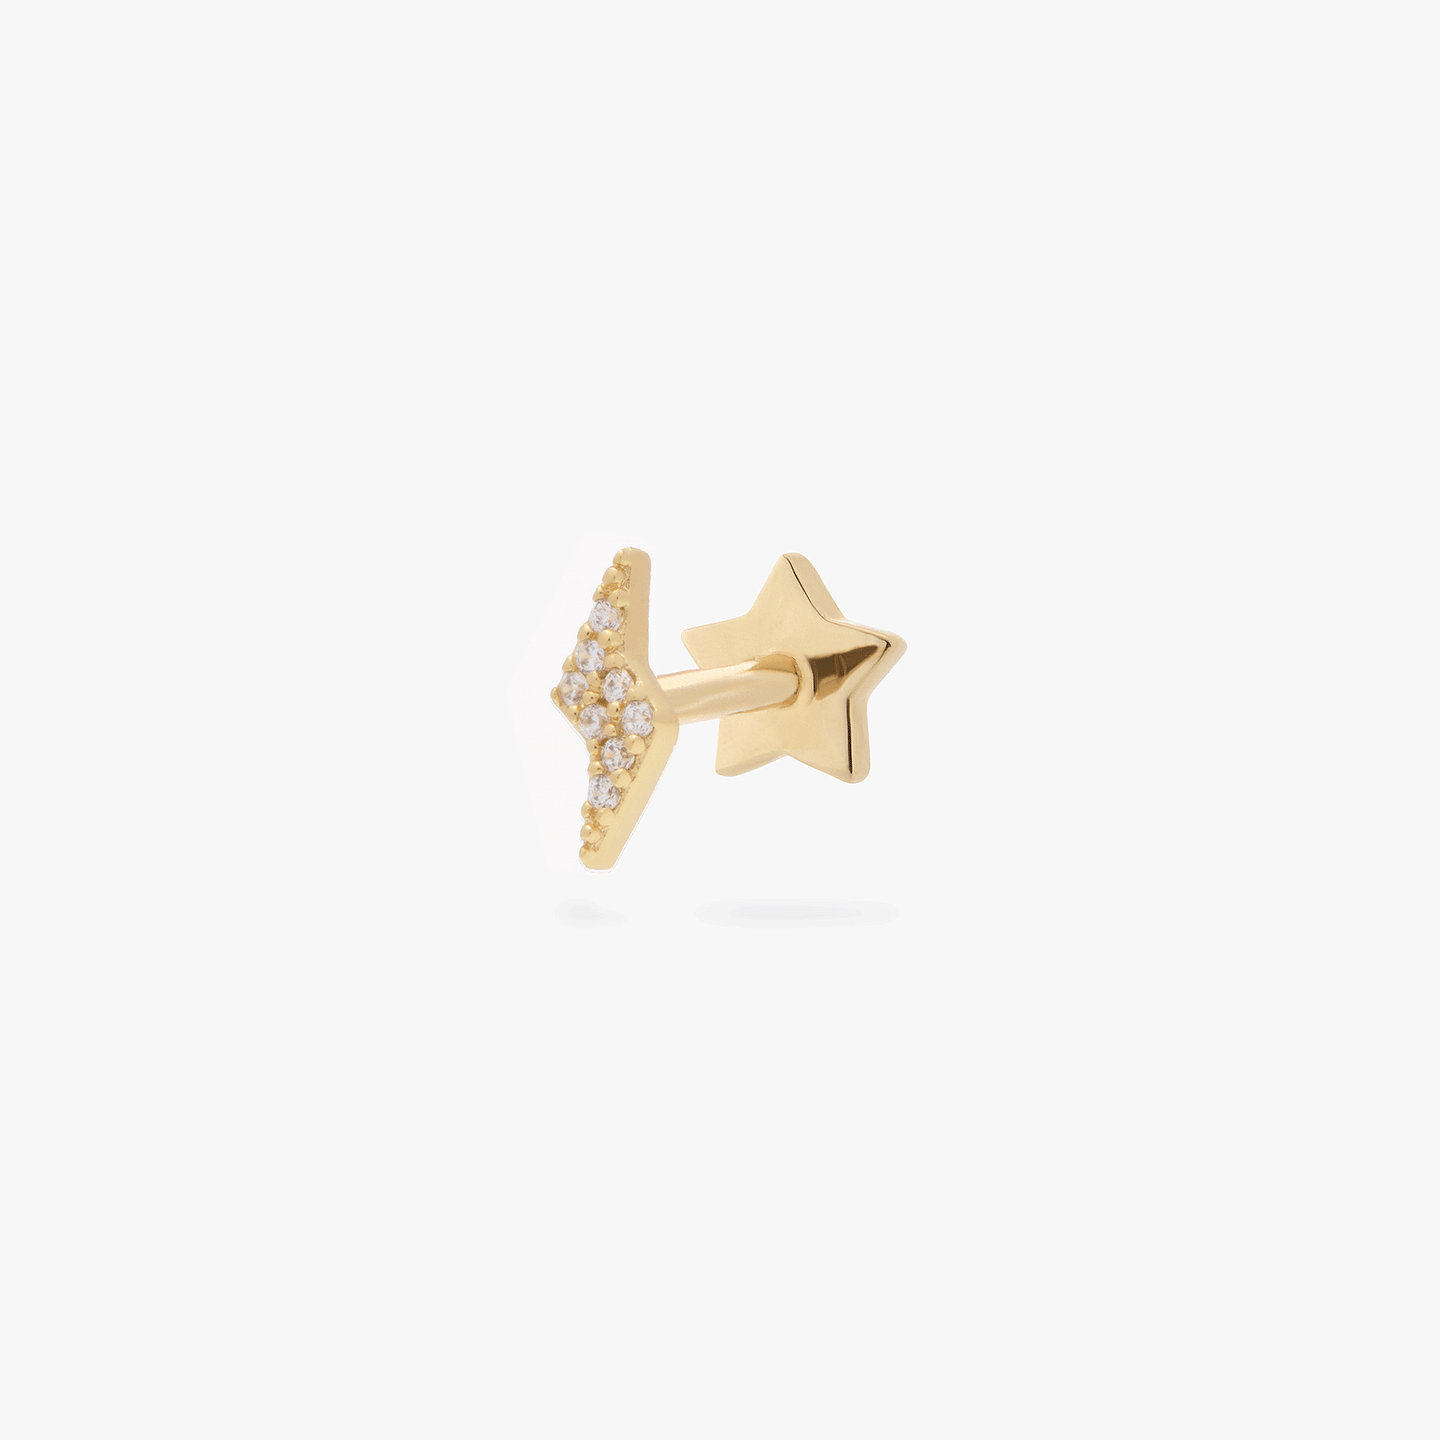 Reversible flatback stud with a Pave Lighting top with a star shaped flatback post color:null|gold/clear